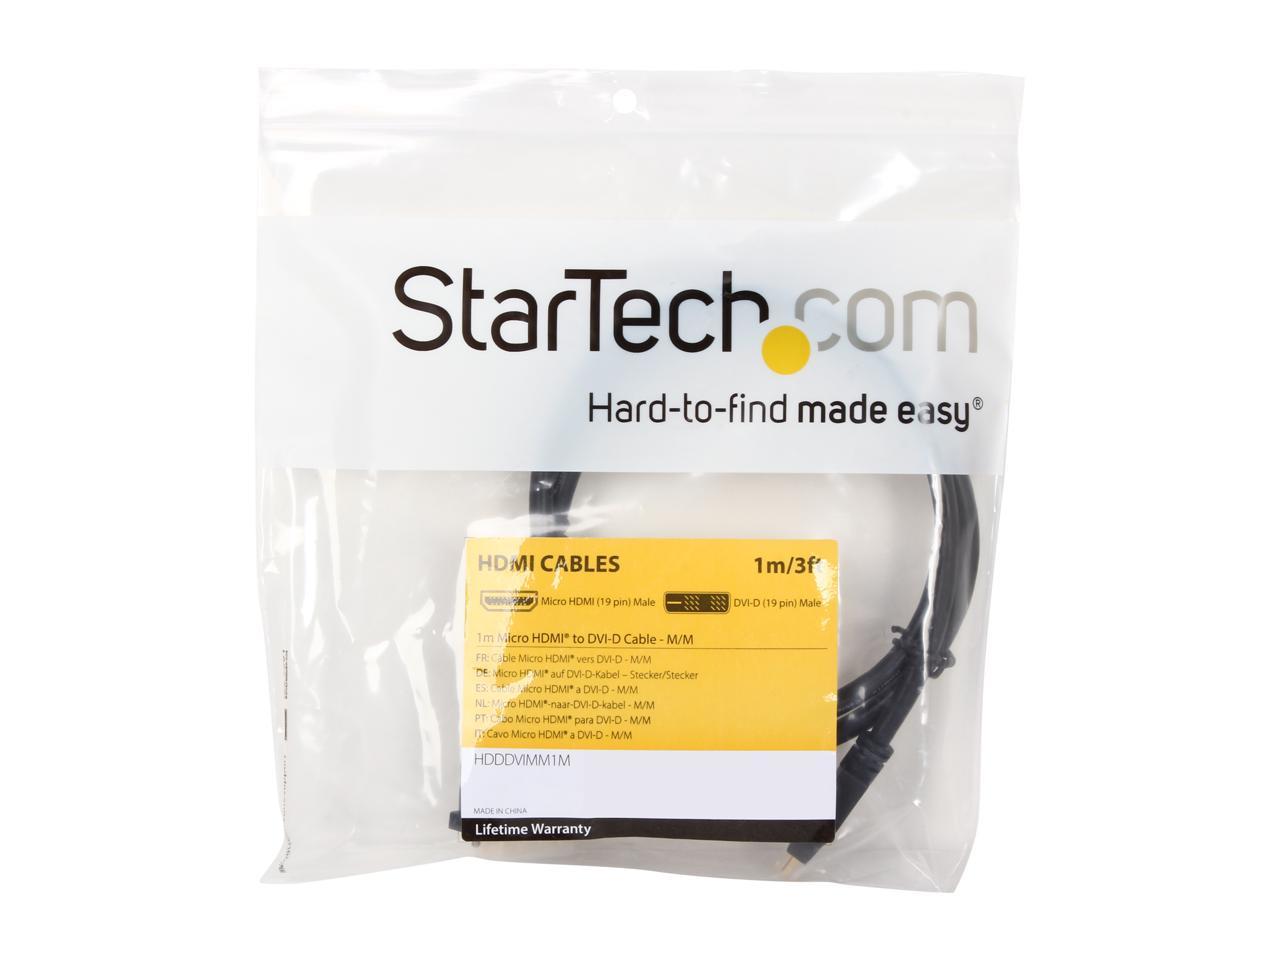 StarTech.com HDDDVIMM1M Black Micro HDMI (19 pin) Male to DVI-D (19 pin) Male to Male Cable - image 3 of 3